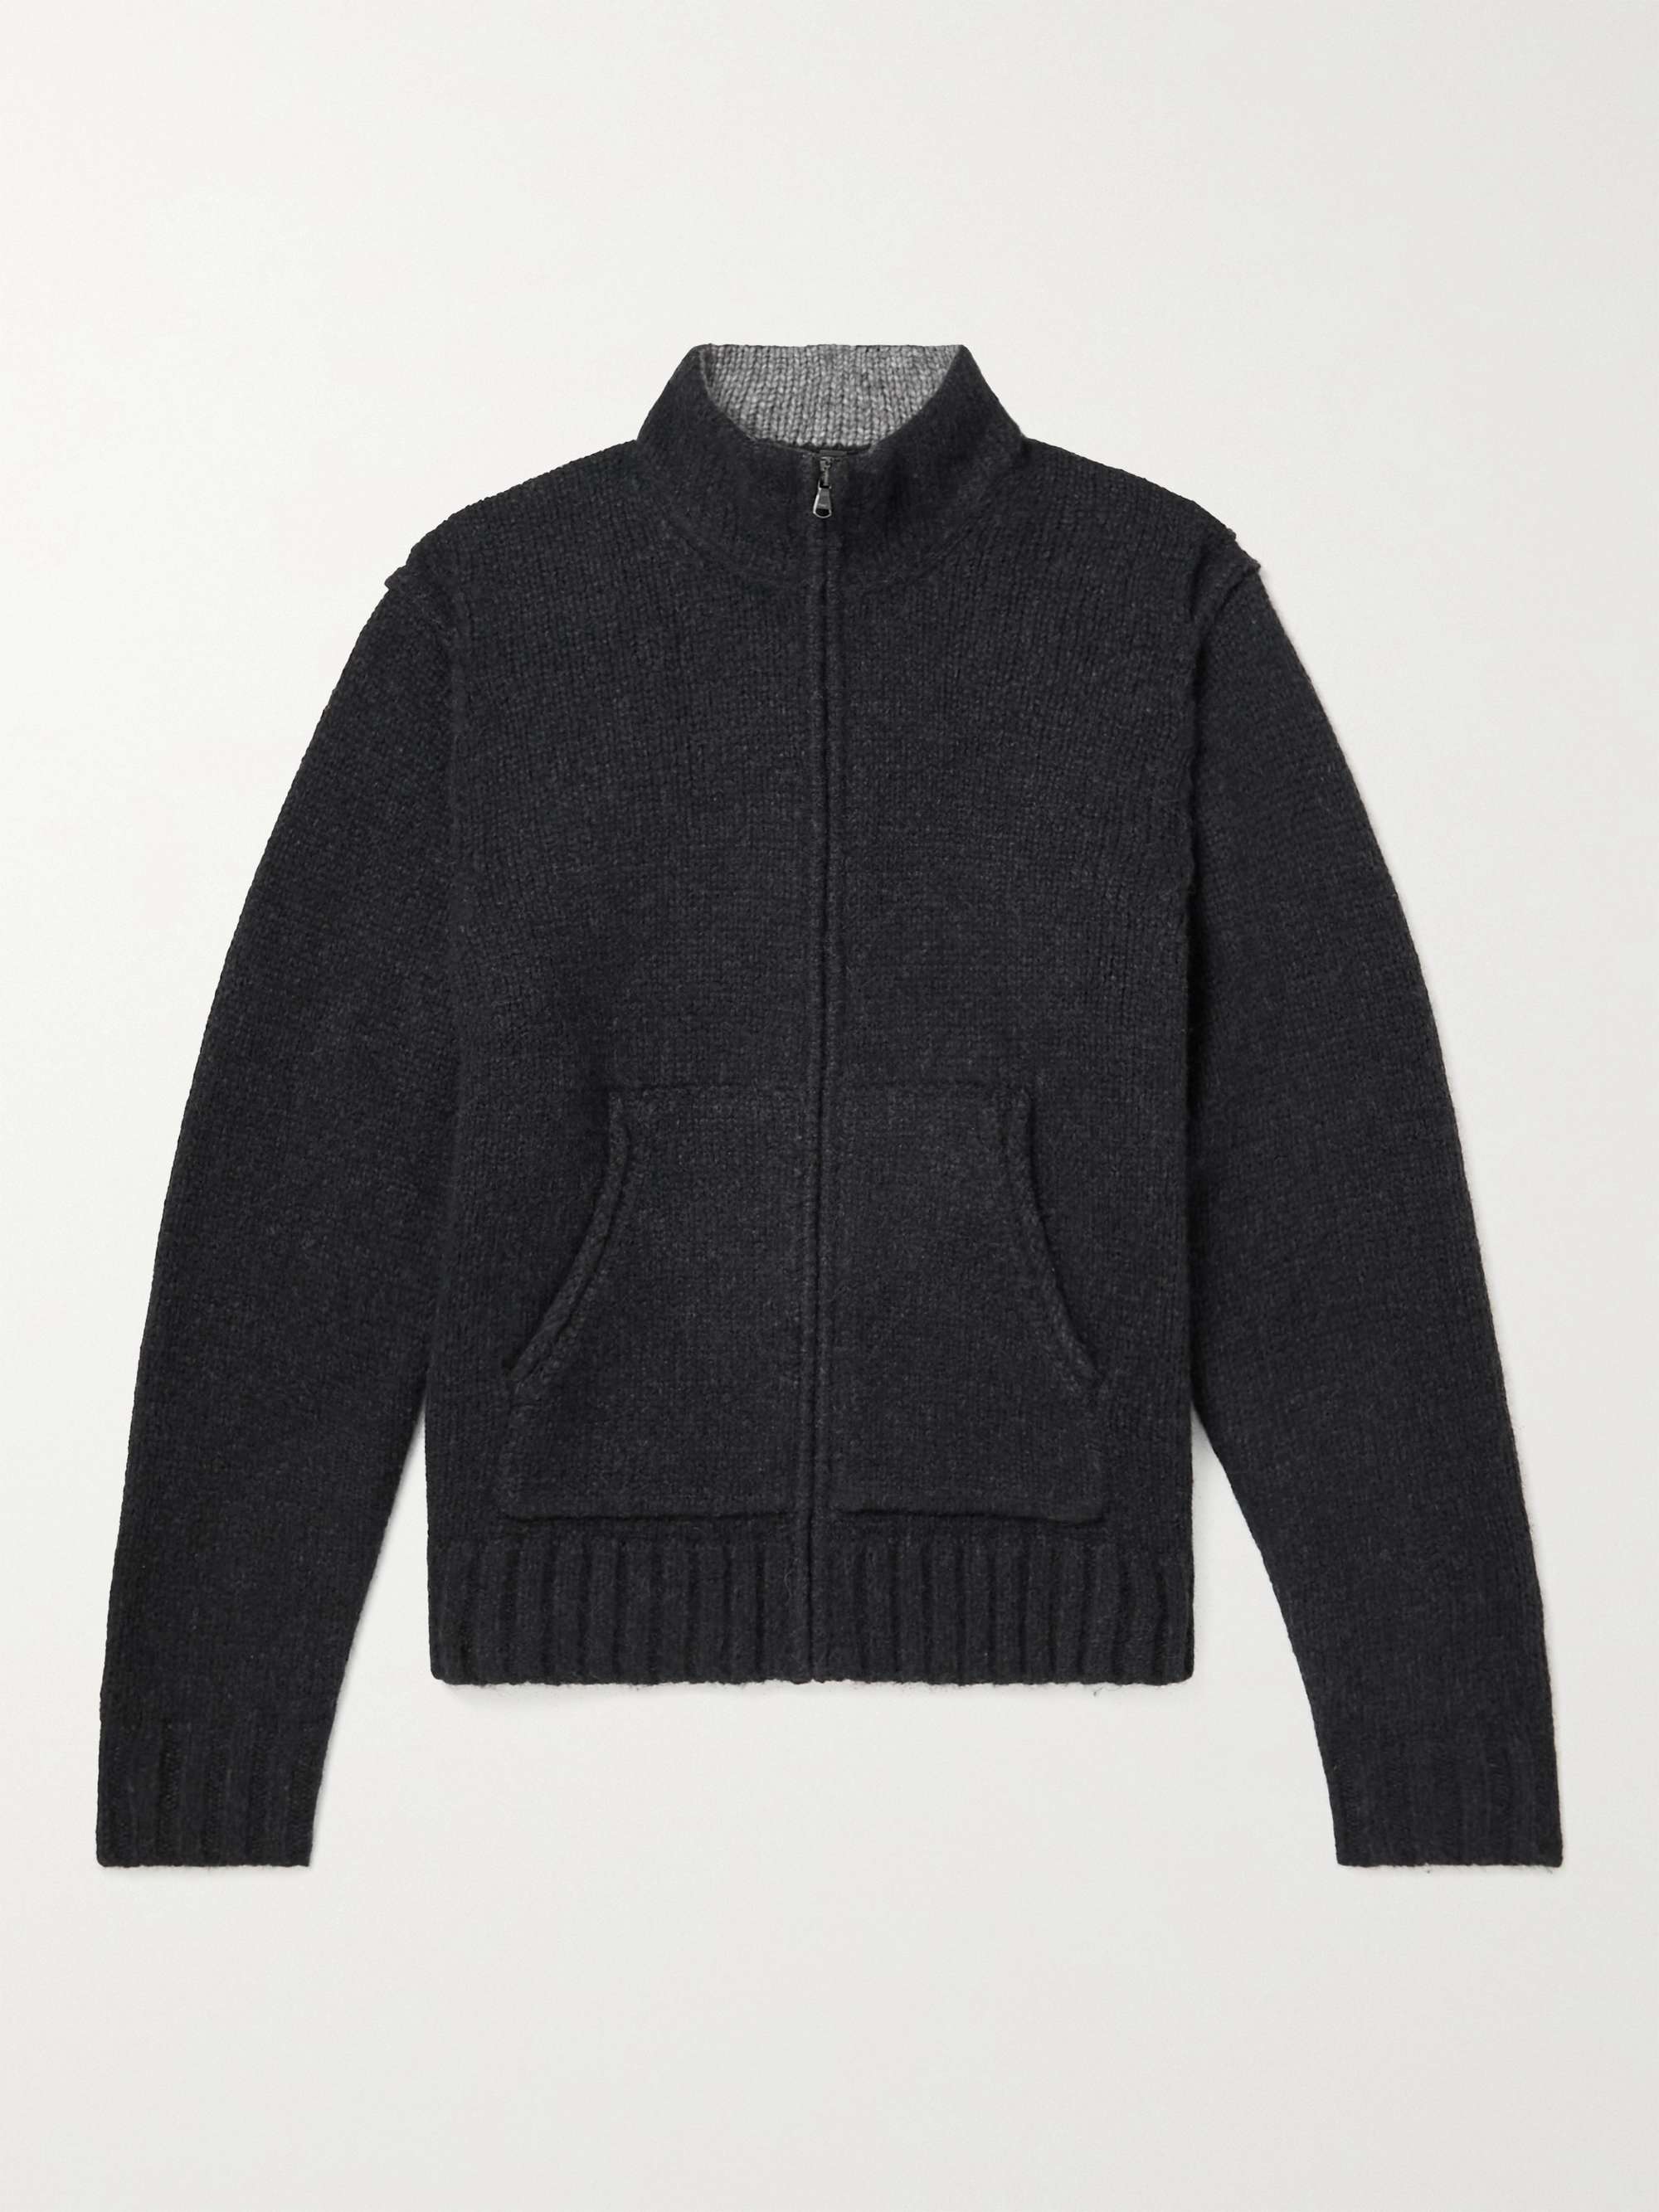 JAMES PERSE Knitted Zip-Up Cardigan